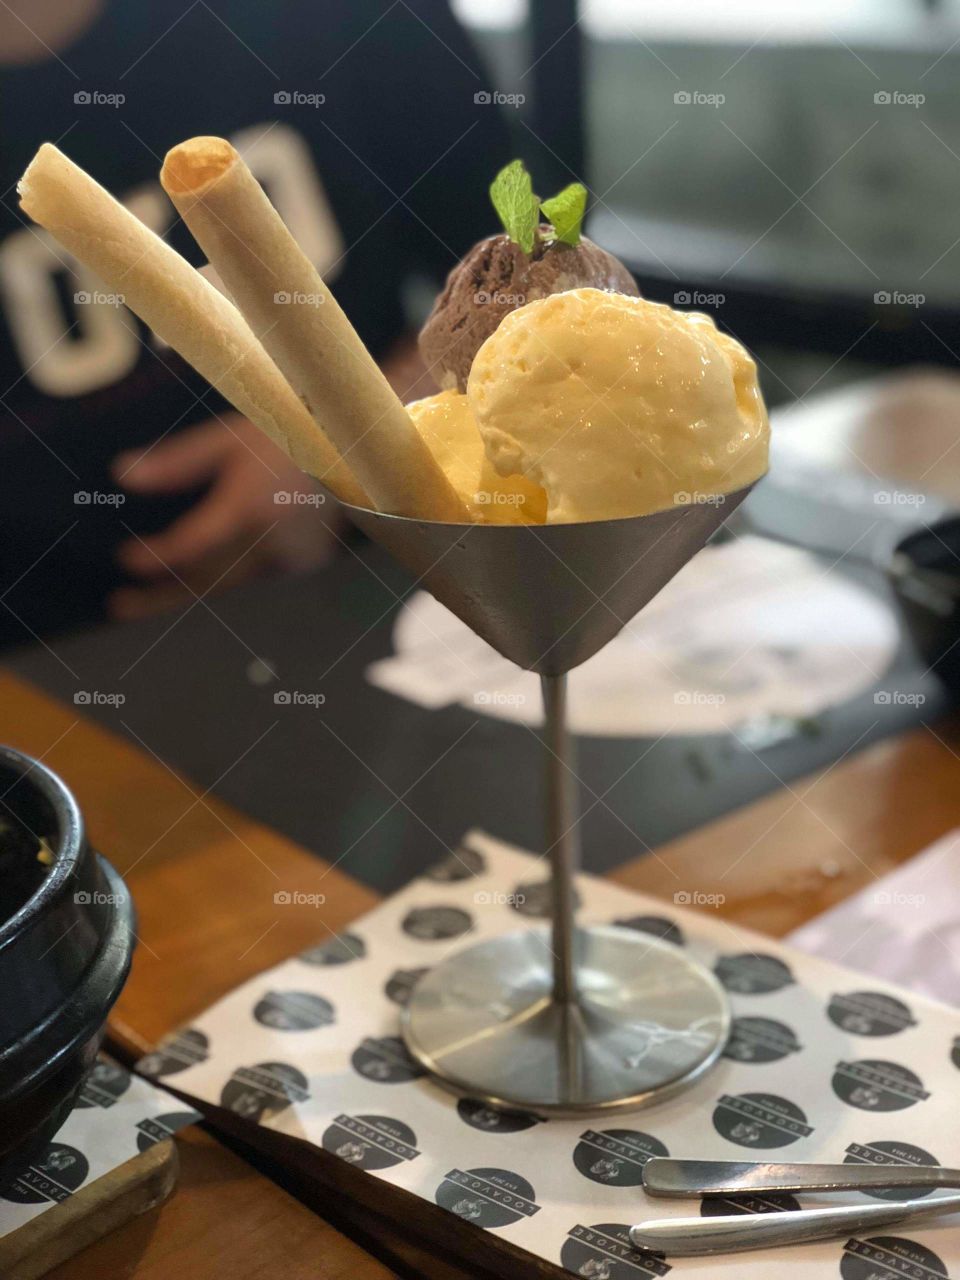 A delicious and mouth-watering ice cream on the table.